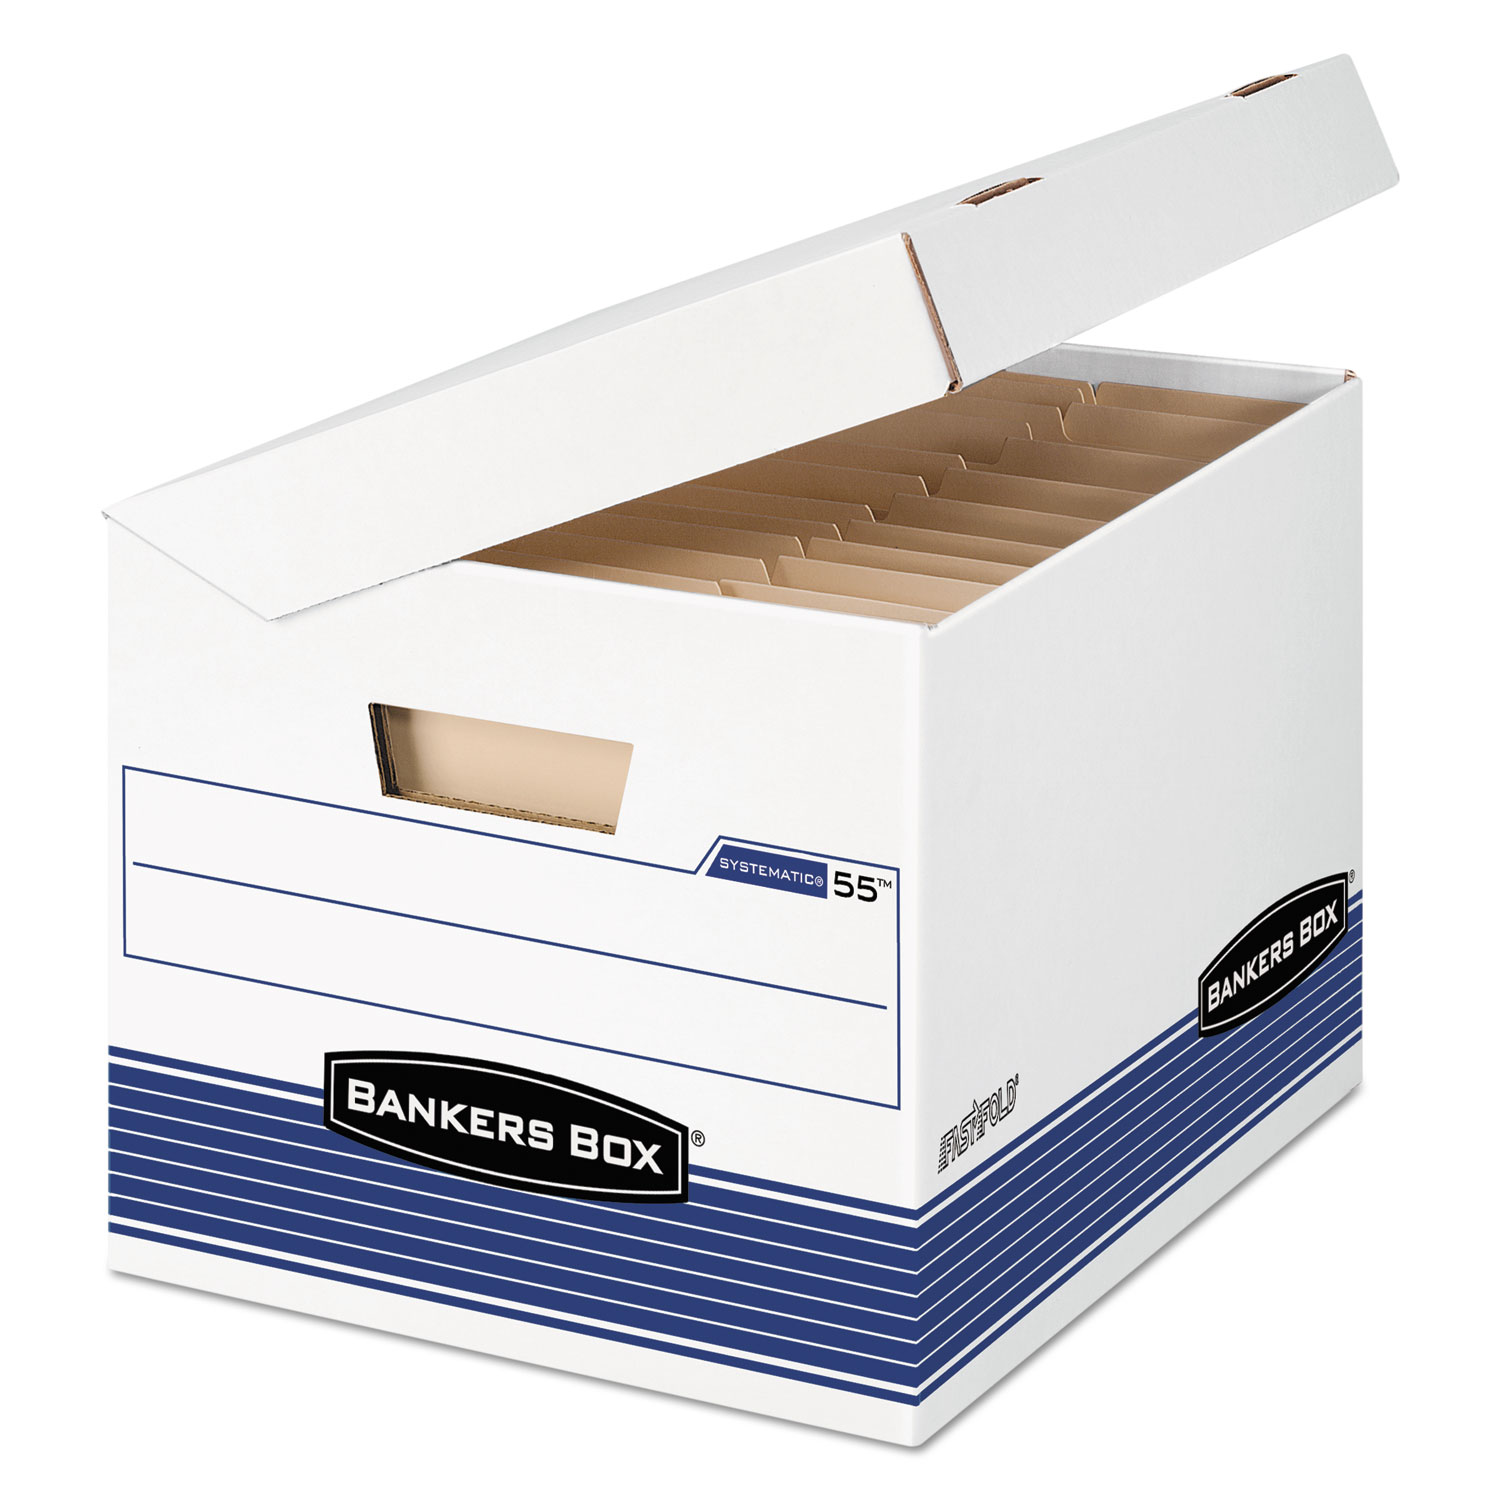  Bankers Box 0005502 SYSTEMATIC Medium-Duty Strength Storage Boxes, Letter/Legal Files, White/Blue, 12/Carton (FEL0005502) 